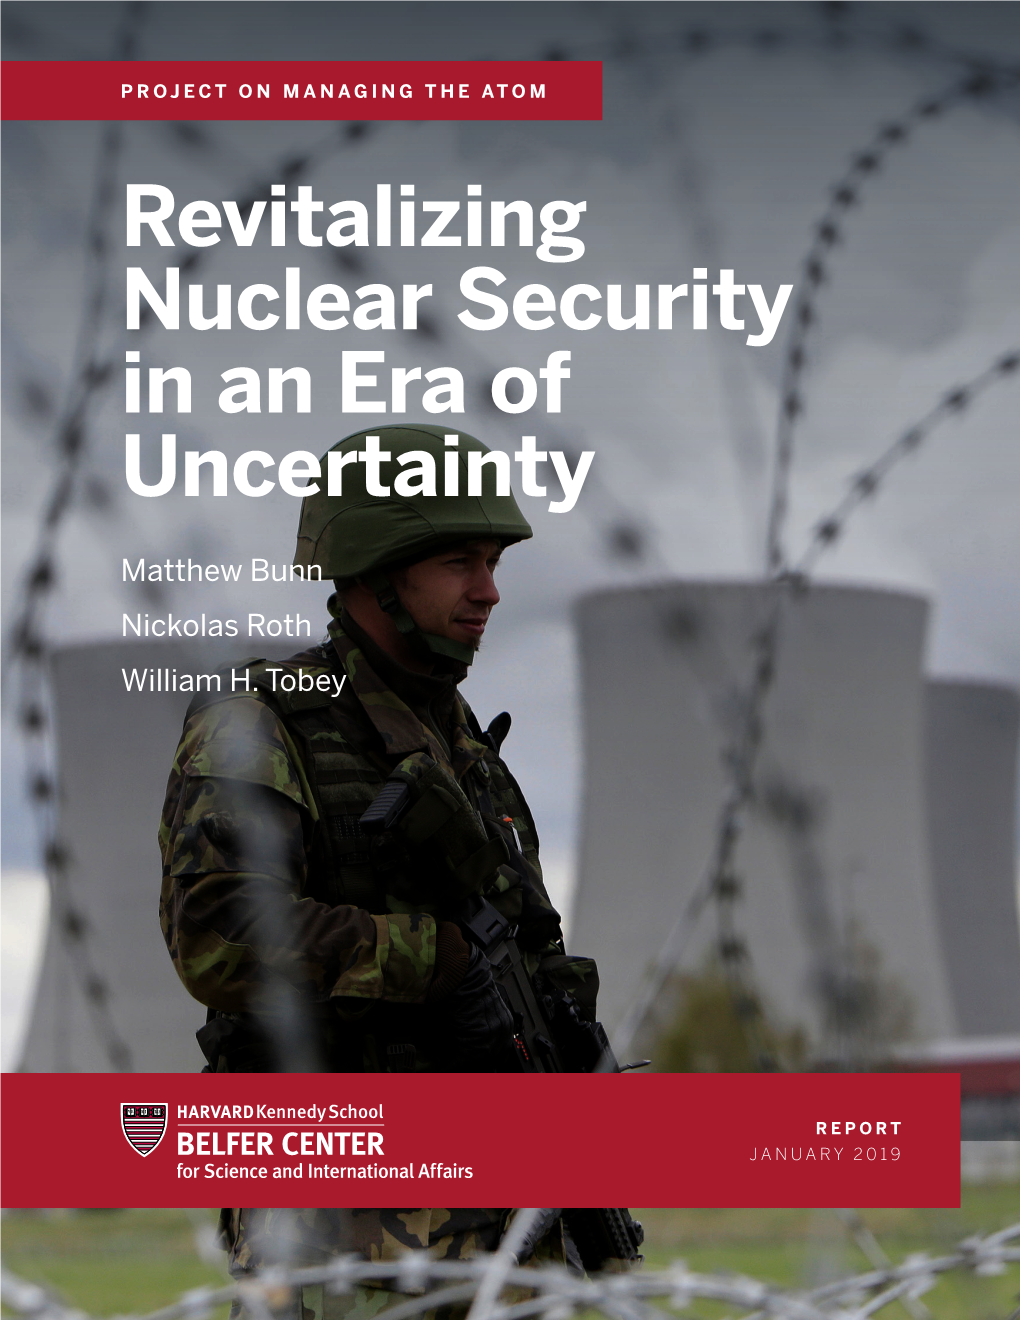 Revitalizing Nuclear Security in an Era of Uncertainty